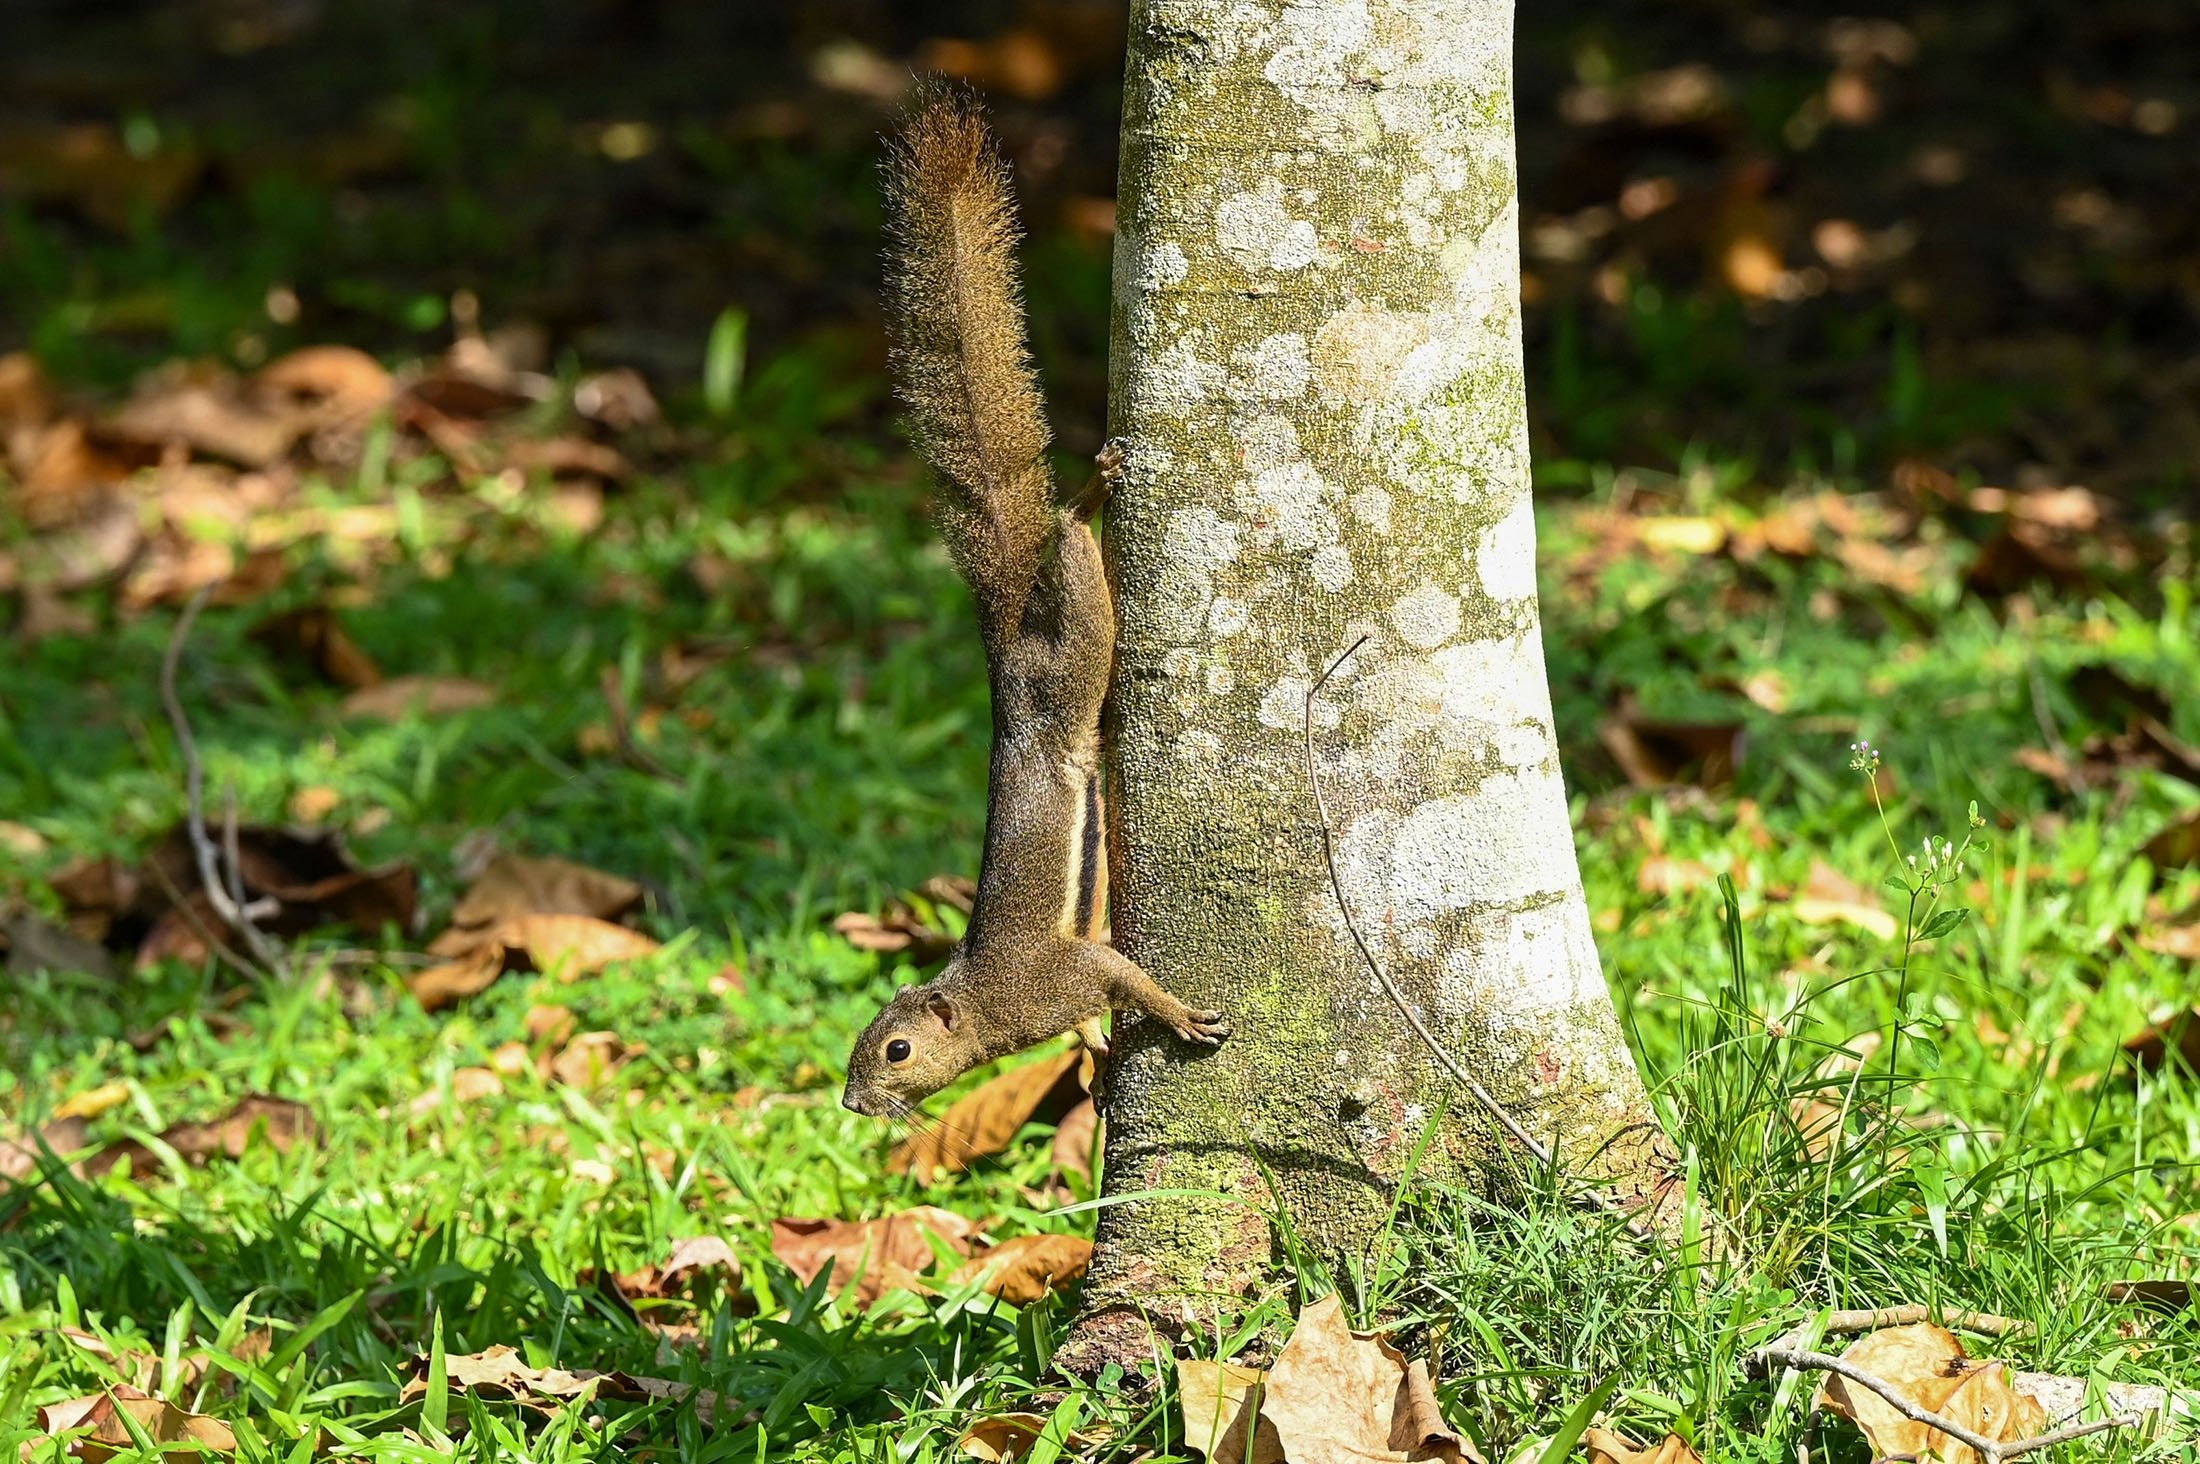 A squirrel crawls a tree trunk to look for food at a park in Singapore, July 21, 2021. (AFP Photo)